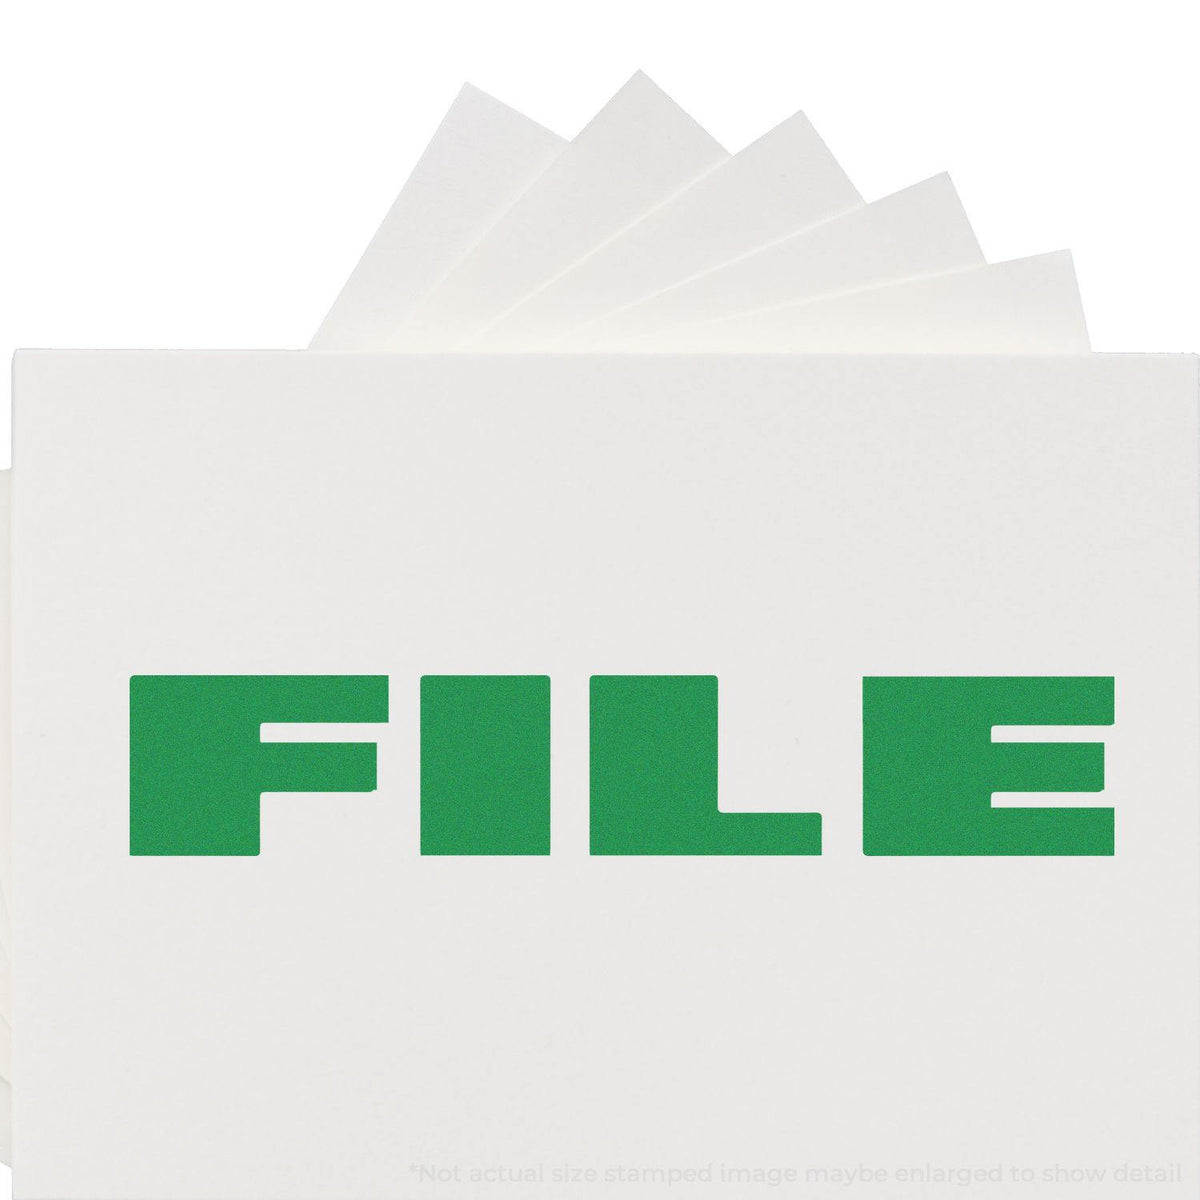 In Use Large Bold Font File Rubber Stamp Image